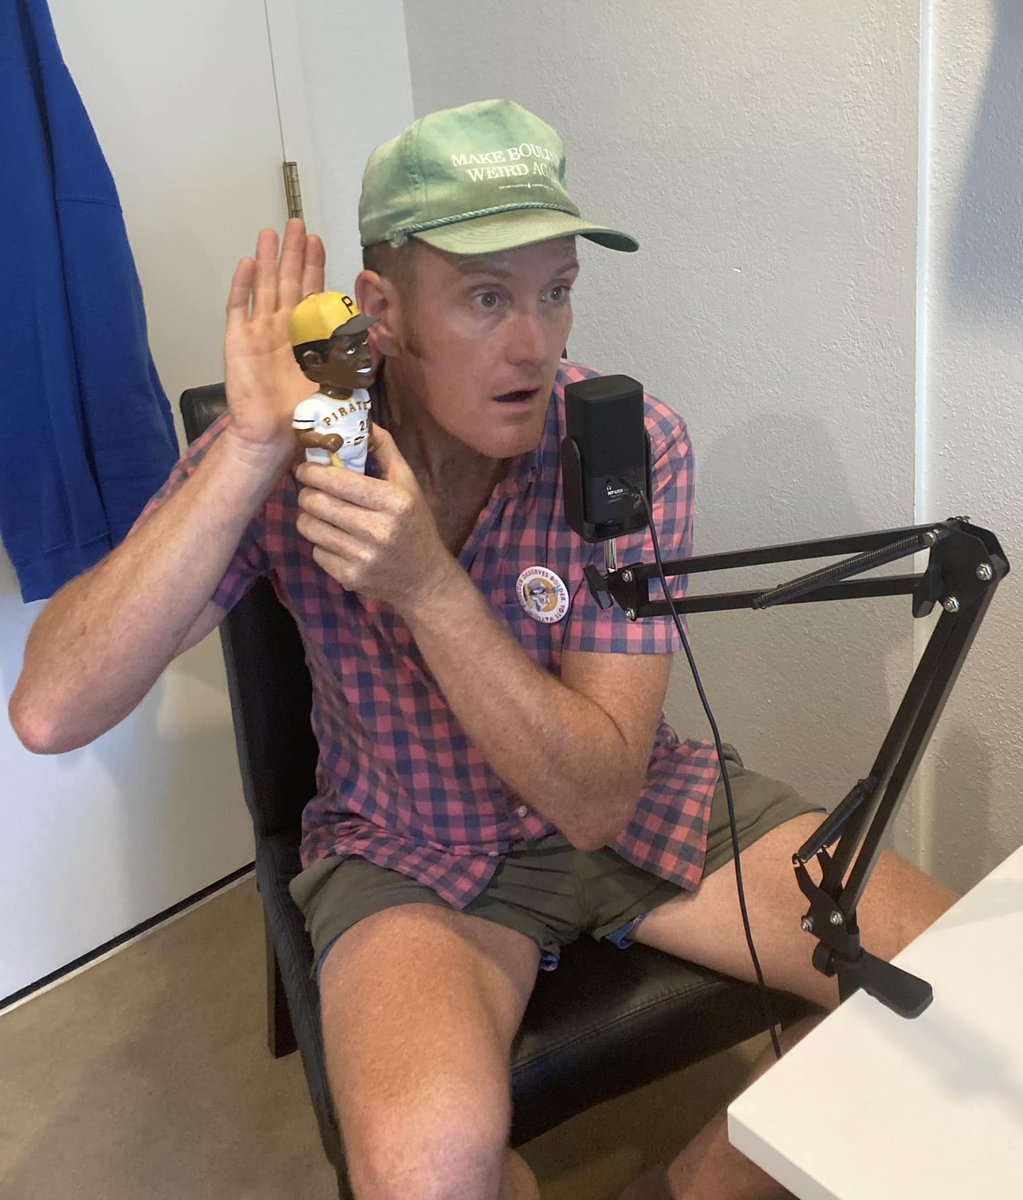 @WaylonLewis of @elephantjournal came by to record an episode of @MileHighStash today, in the midst of his campaign for #Boulder City Council. Give a follow at TinyUrl.com/MileHighStashP… or wherever you get your podcasts, so you don’t miss my chat with Waylon.